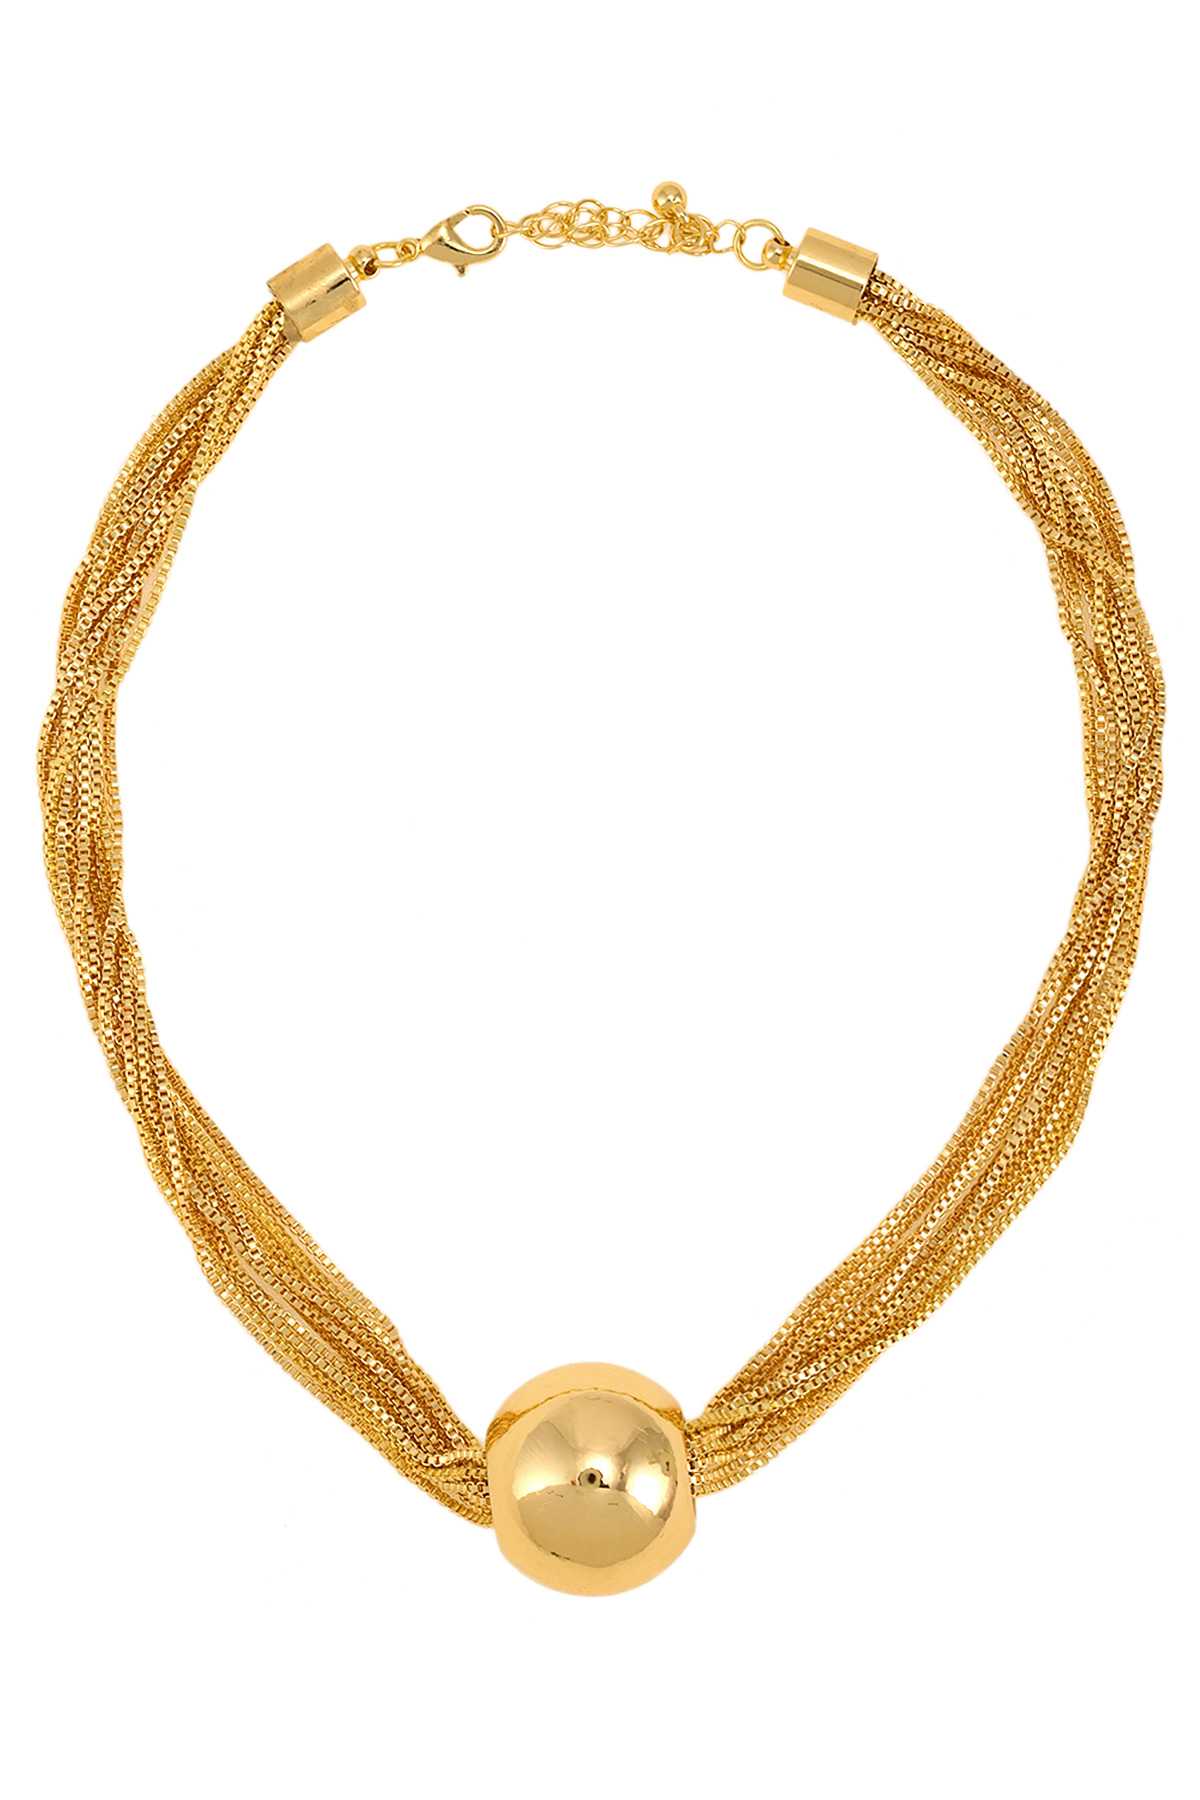 Ball Accent Twisted Chain Necklace